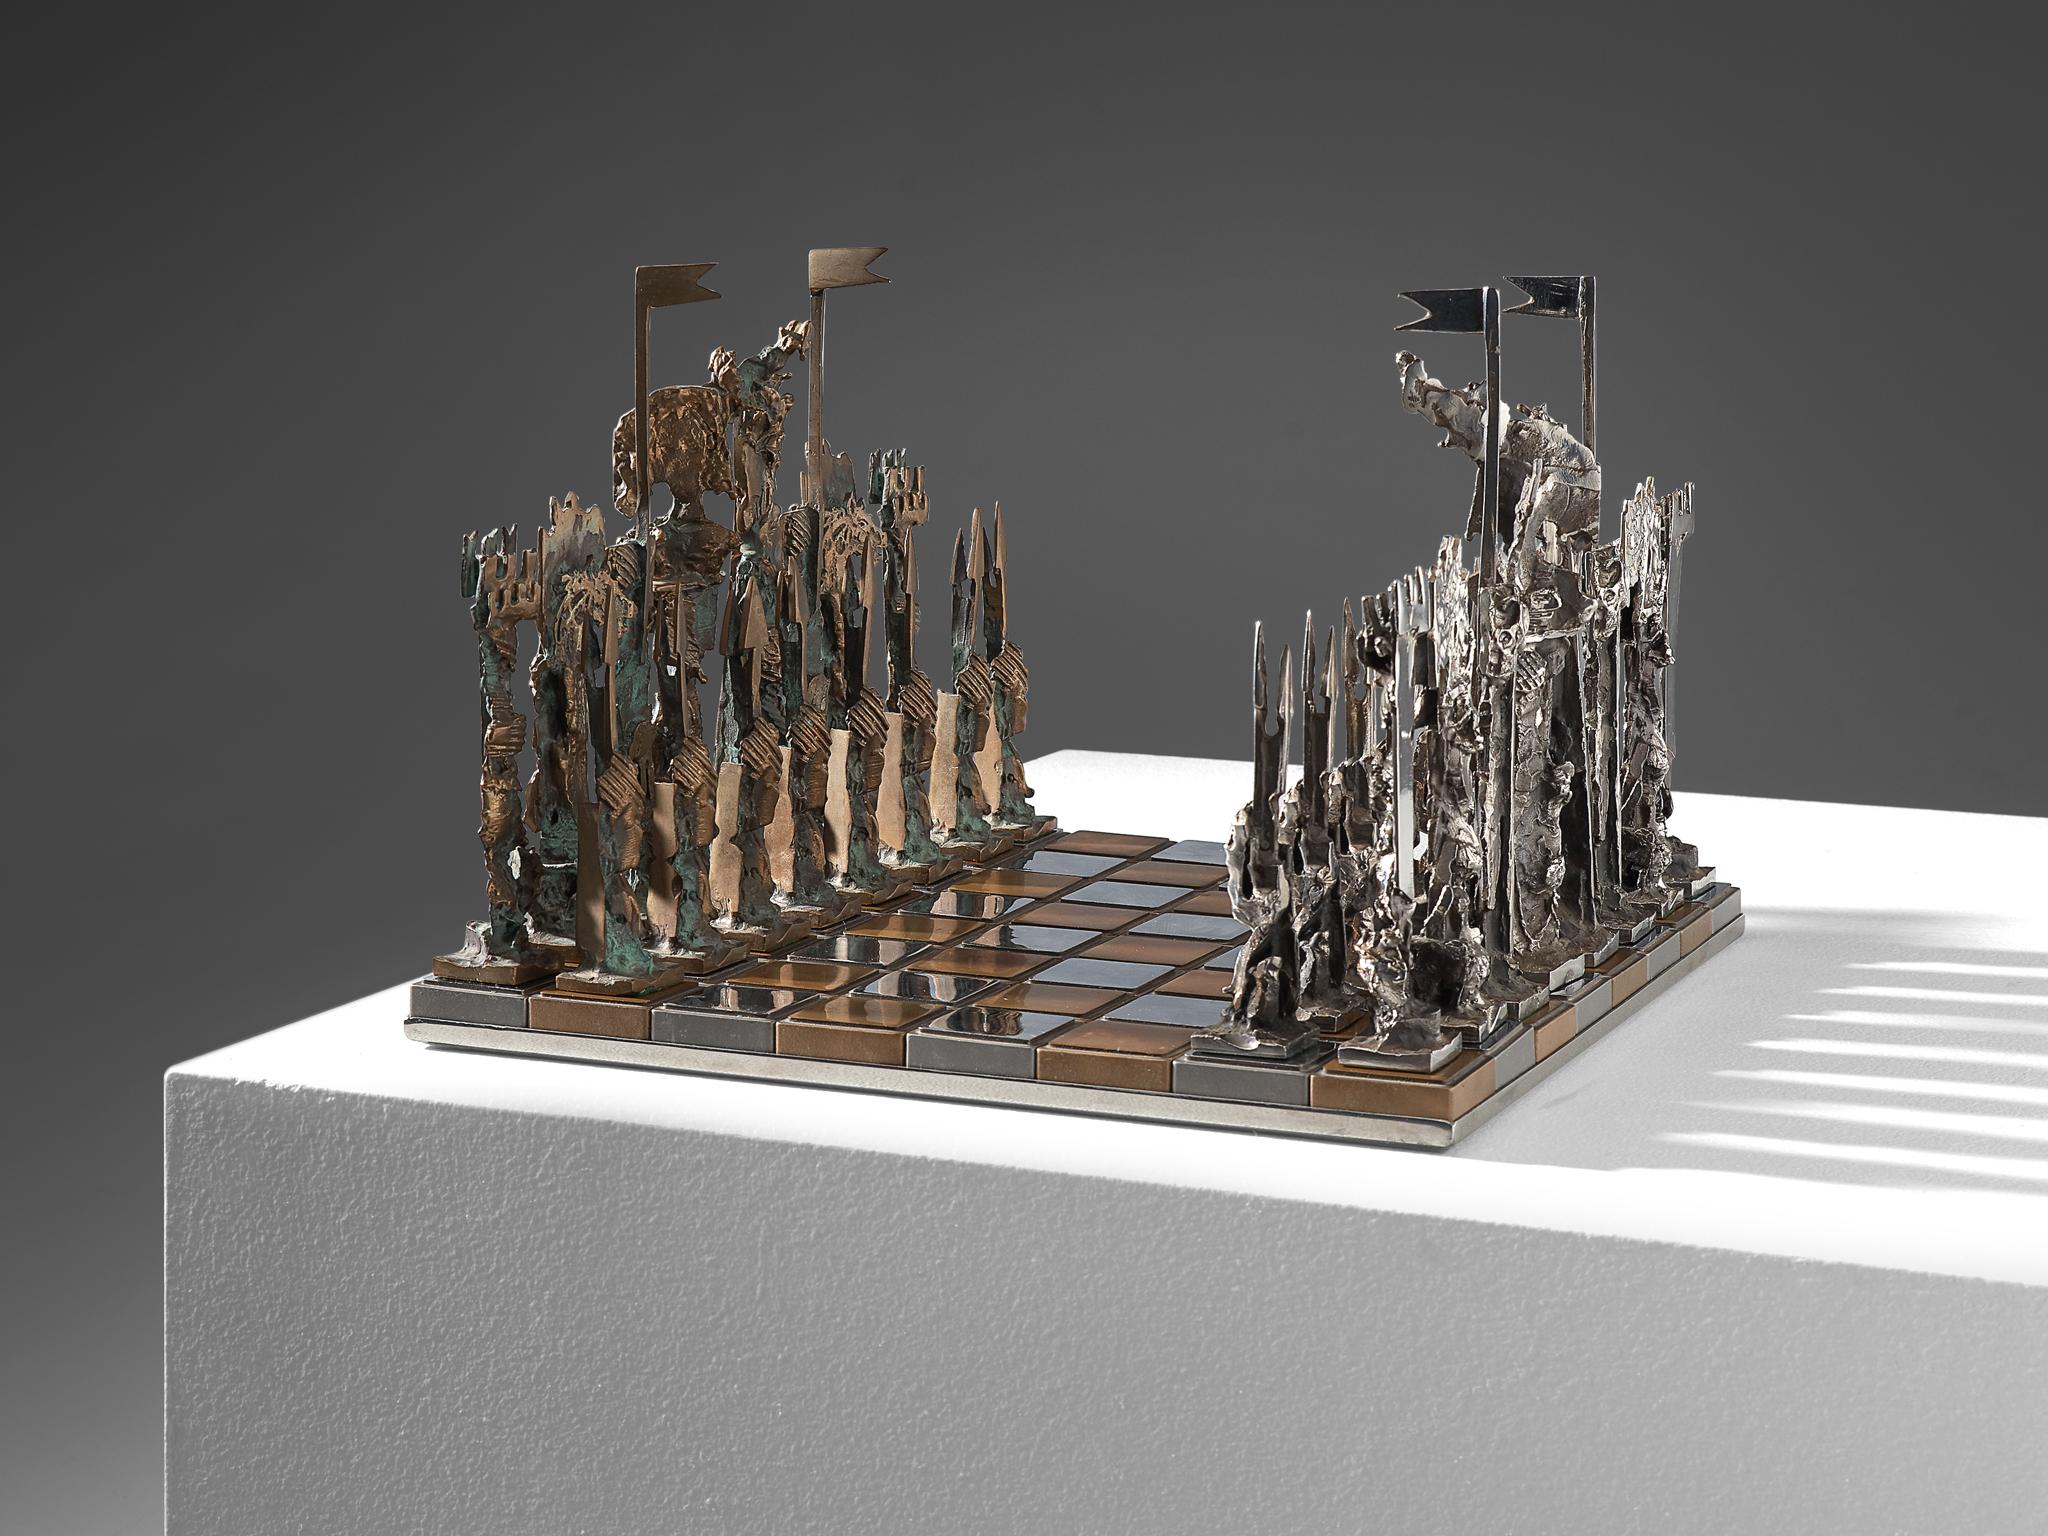 Chess game, bronze, metal, glass, Italy, 1970s.

Exceptional game of chess. The board consists of bronze and mirrored cubes. All chess pieces are handmade and can be recognized as a specific character of the game by their highly detailed quality.